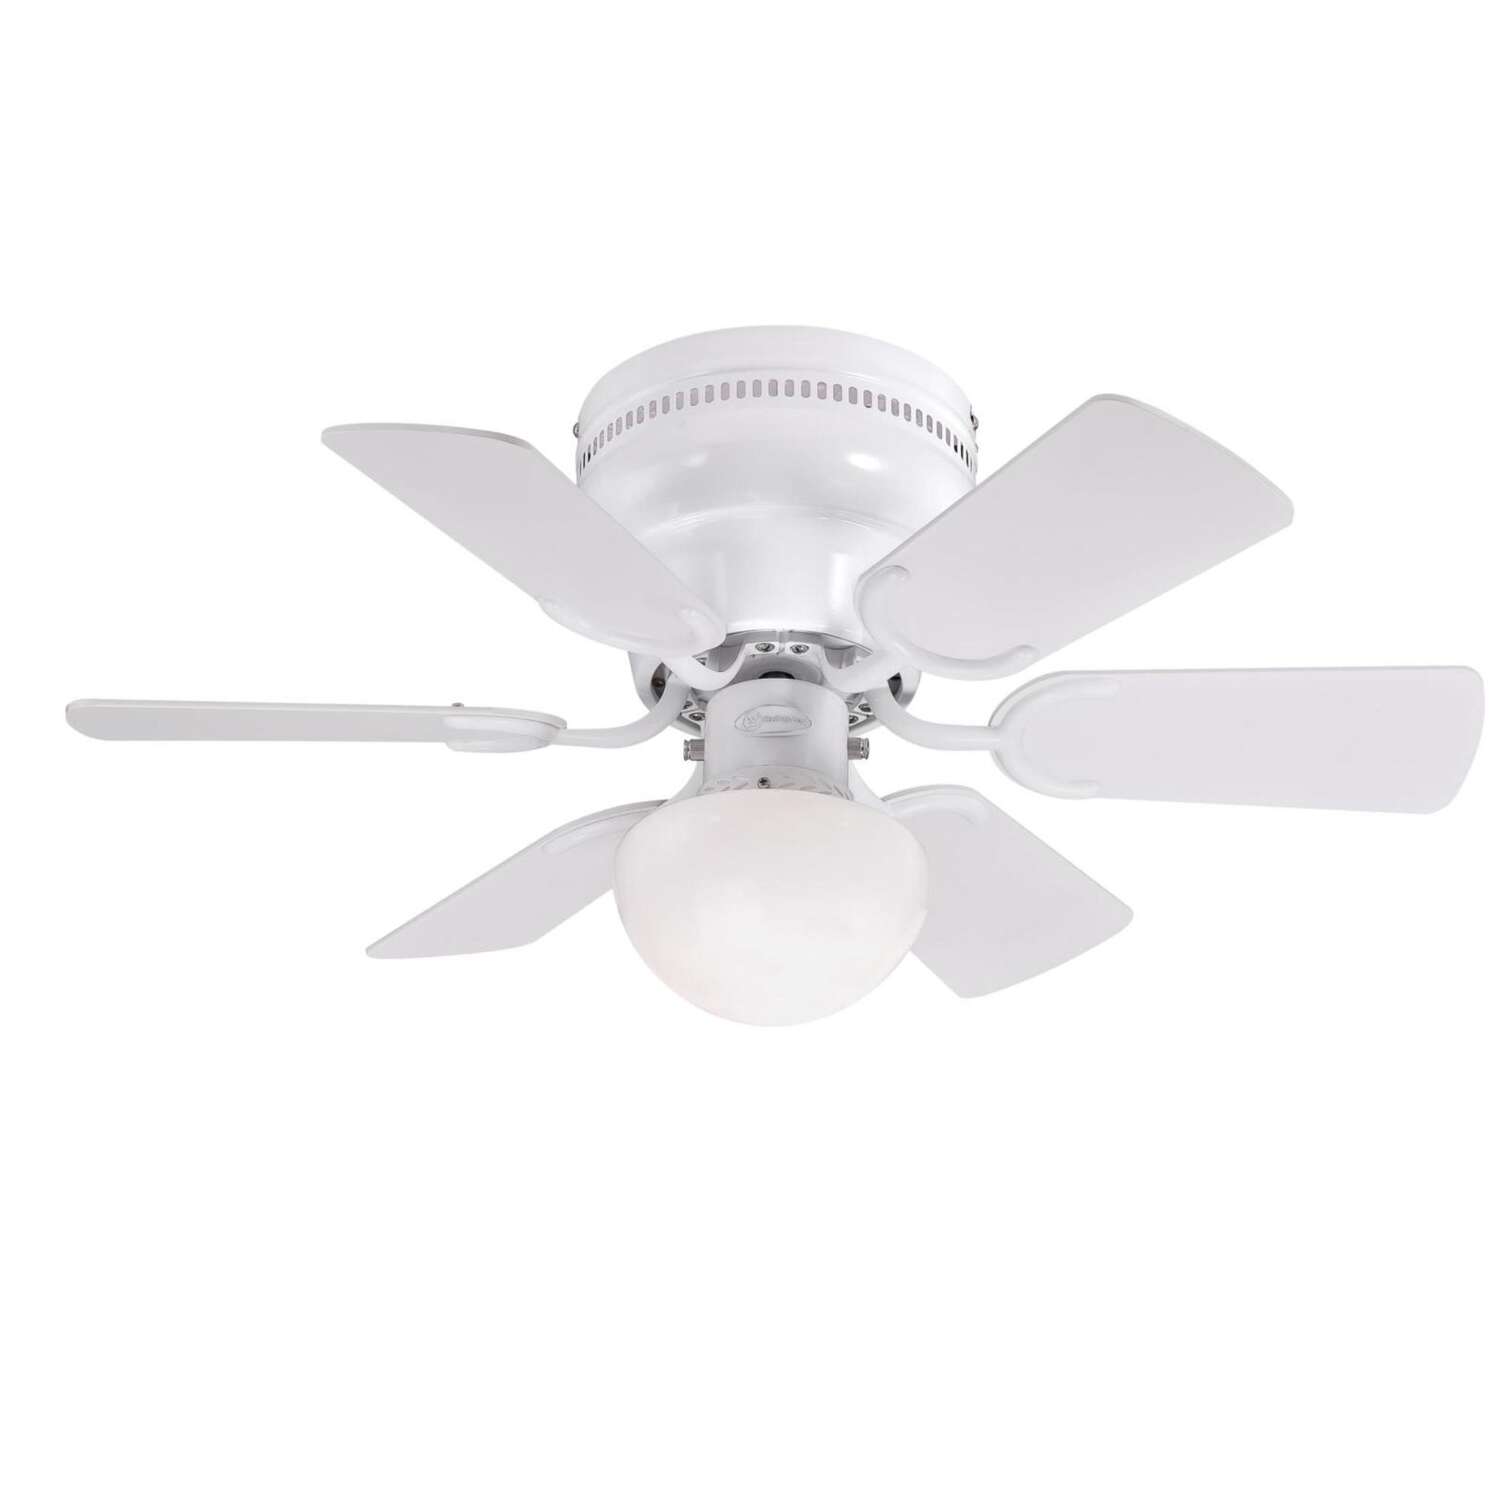 Westinghouse Petite 30 in. White White Indoor Ceiling Fan